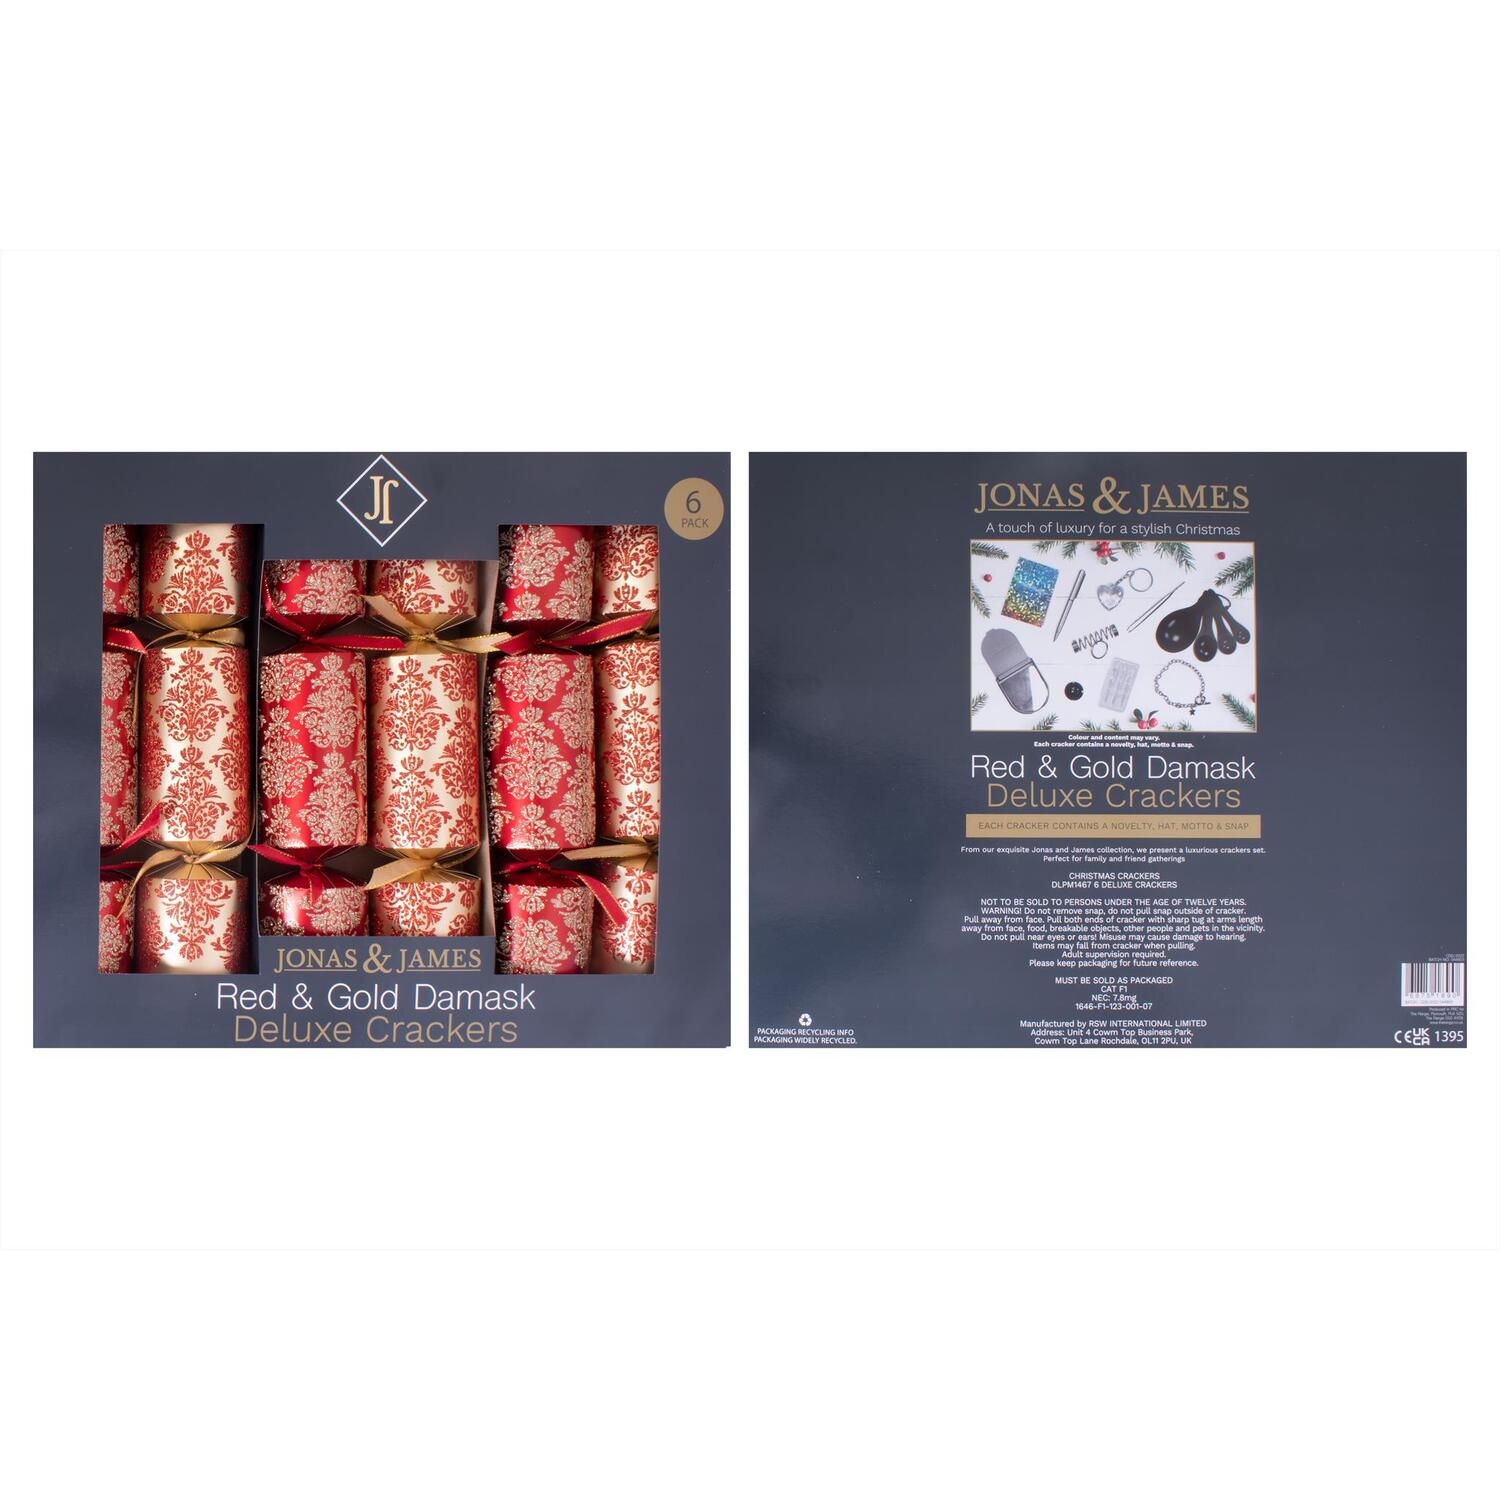 Jonas & James Red and Gold Damask Crackers 6 Pack Image 2